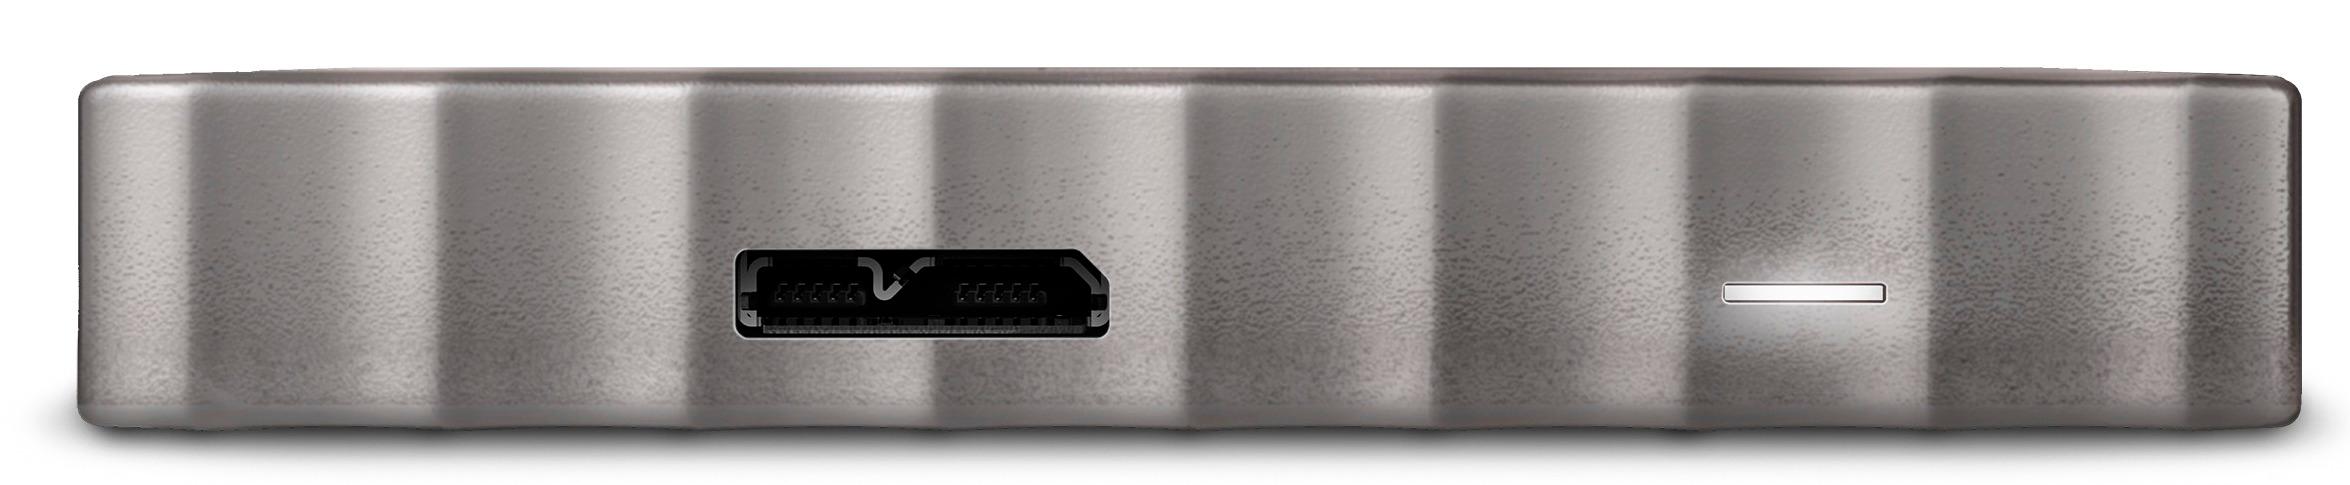  WD 4TB White-Gold My Passport Ultra Portable External Hard  Drive - USB 3.0 - WDBFKT0040BGD-WESN (Old Generation) : Electronics